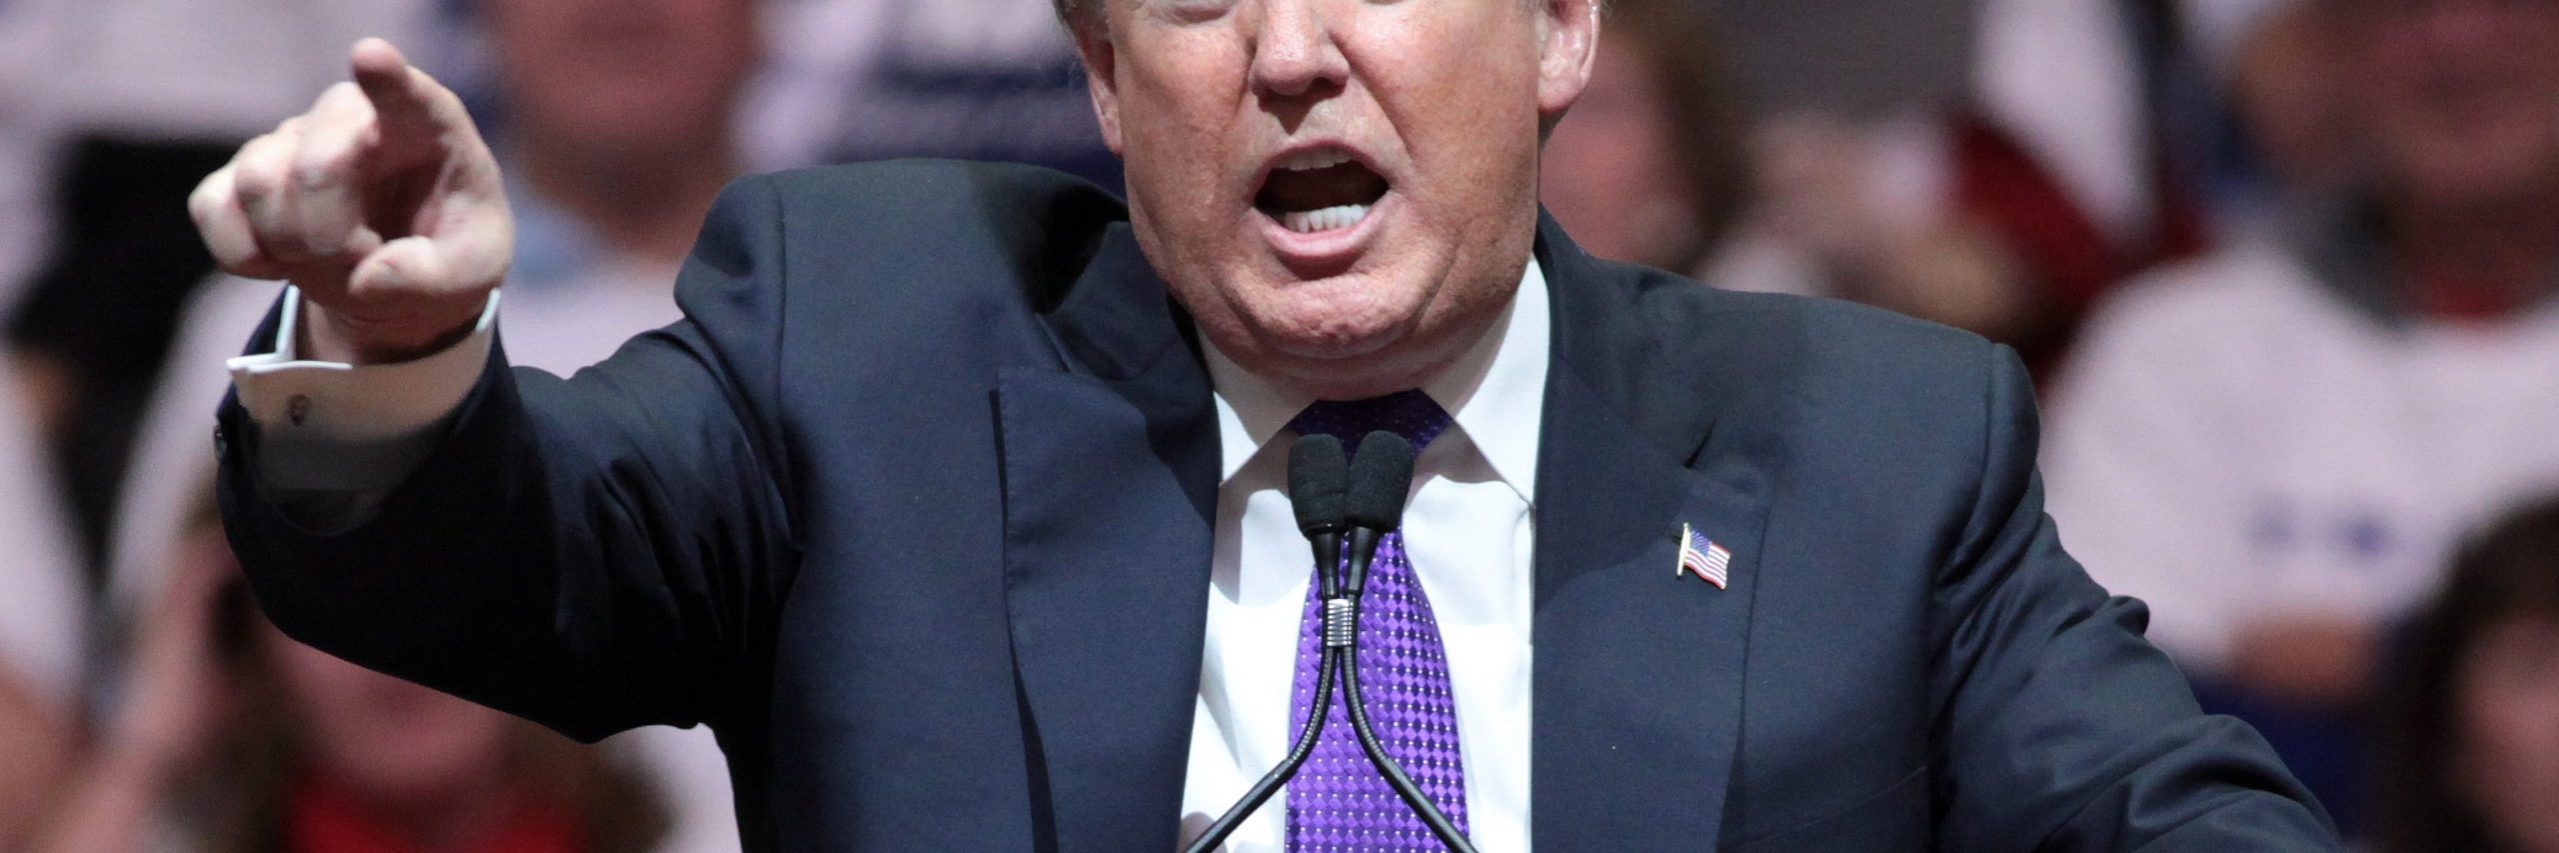 An image of Donald Trump, former U.S President, speaking to voters. Image source: Gage Skidmore, via Wikimedia Commons